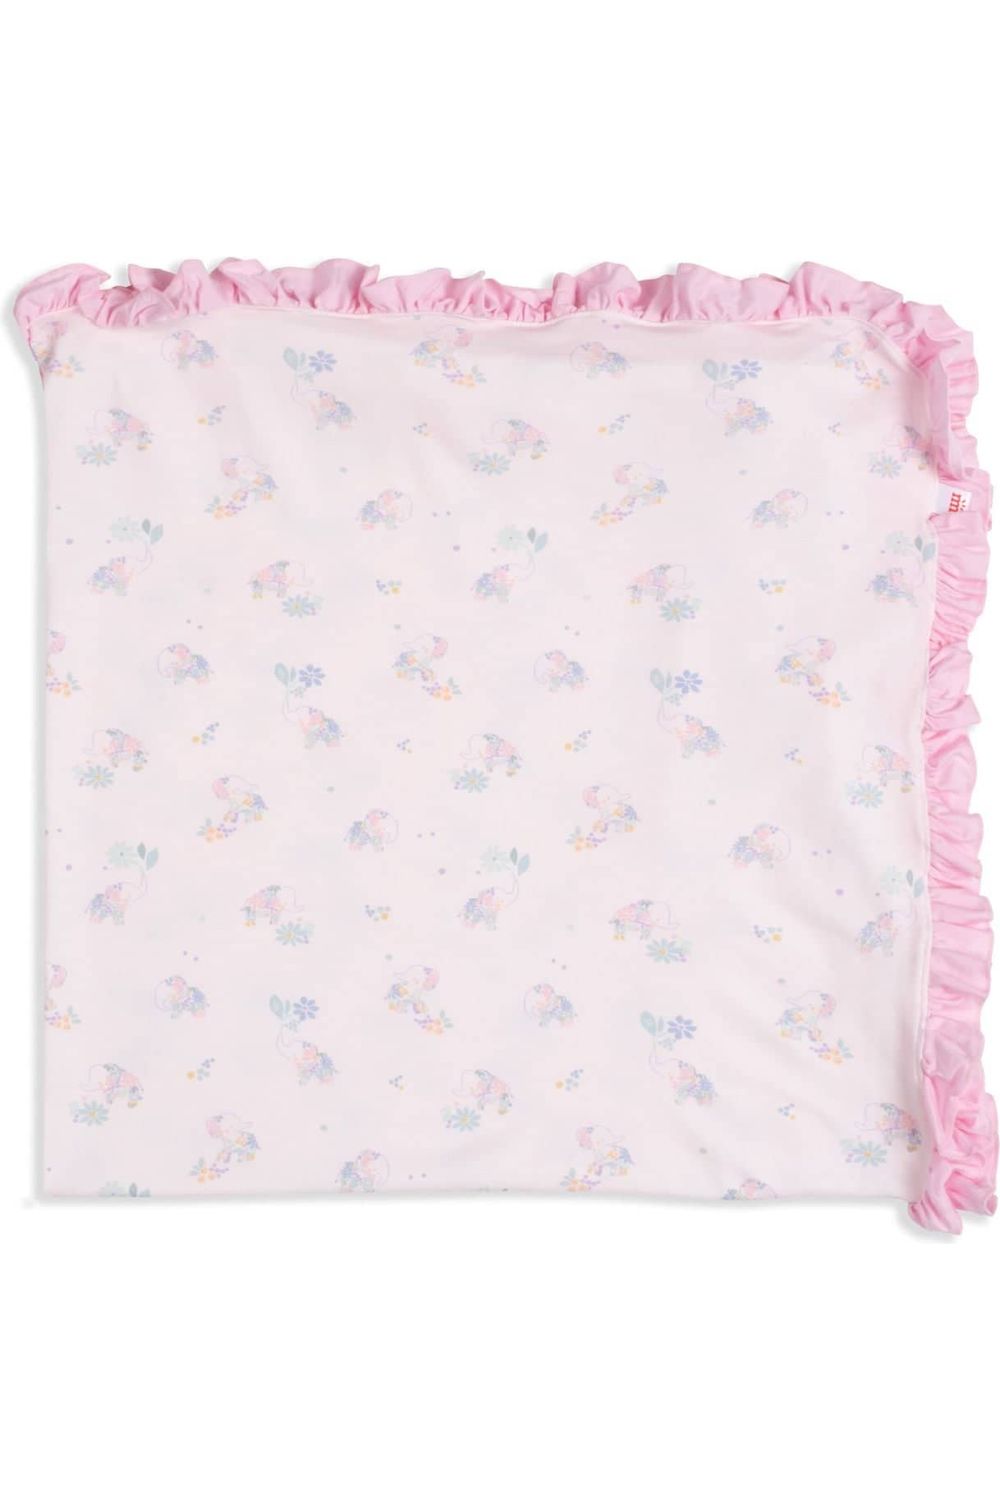 MODAL RUFFLE BLANKET | FORGET ME NOT